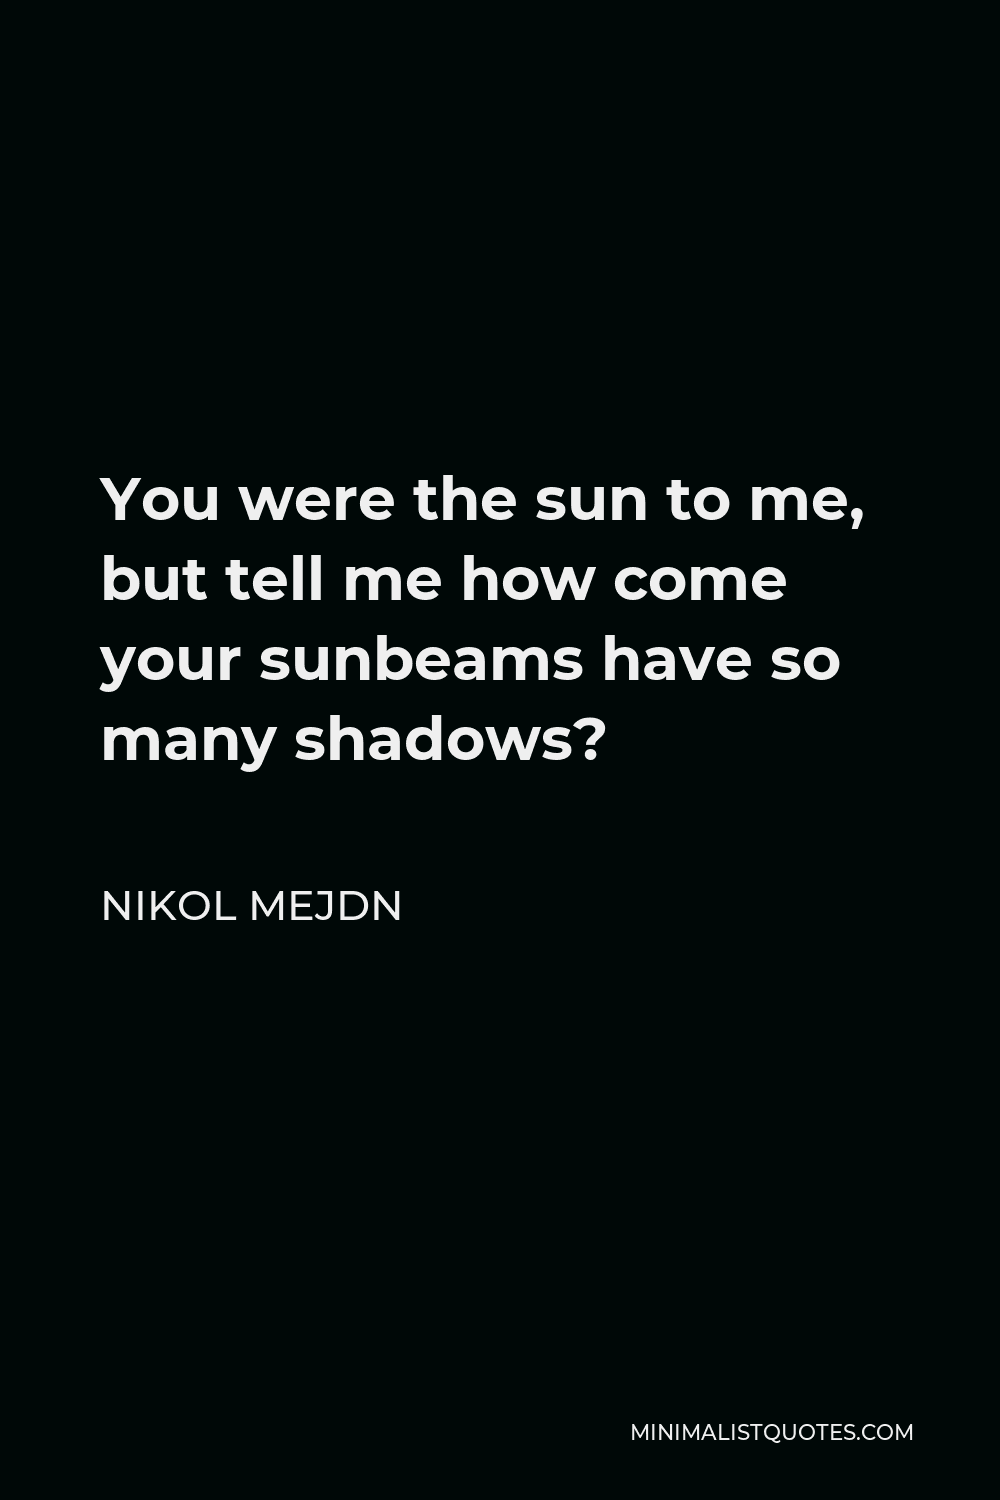 Nikol Mejdn Quote - You were the sun to me, but tell me how come your sunbeams have so many shadows?